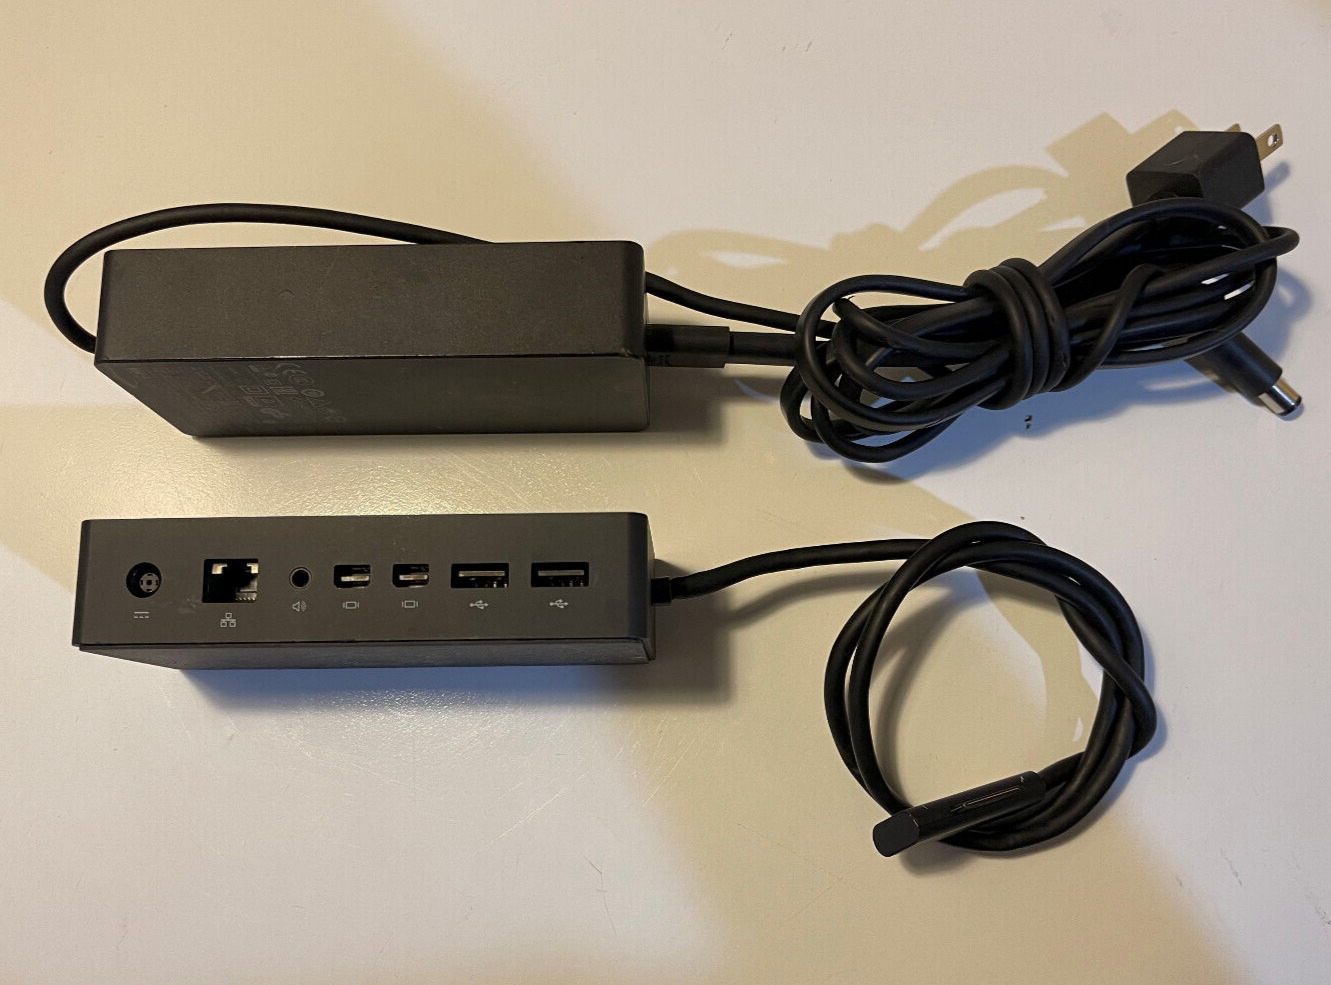 Microsoft Surface Dock Model 1661 Docking Station With Ac Adapter Model 1749